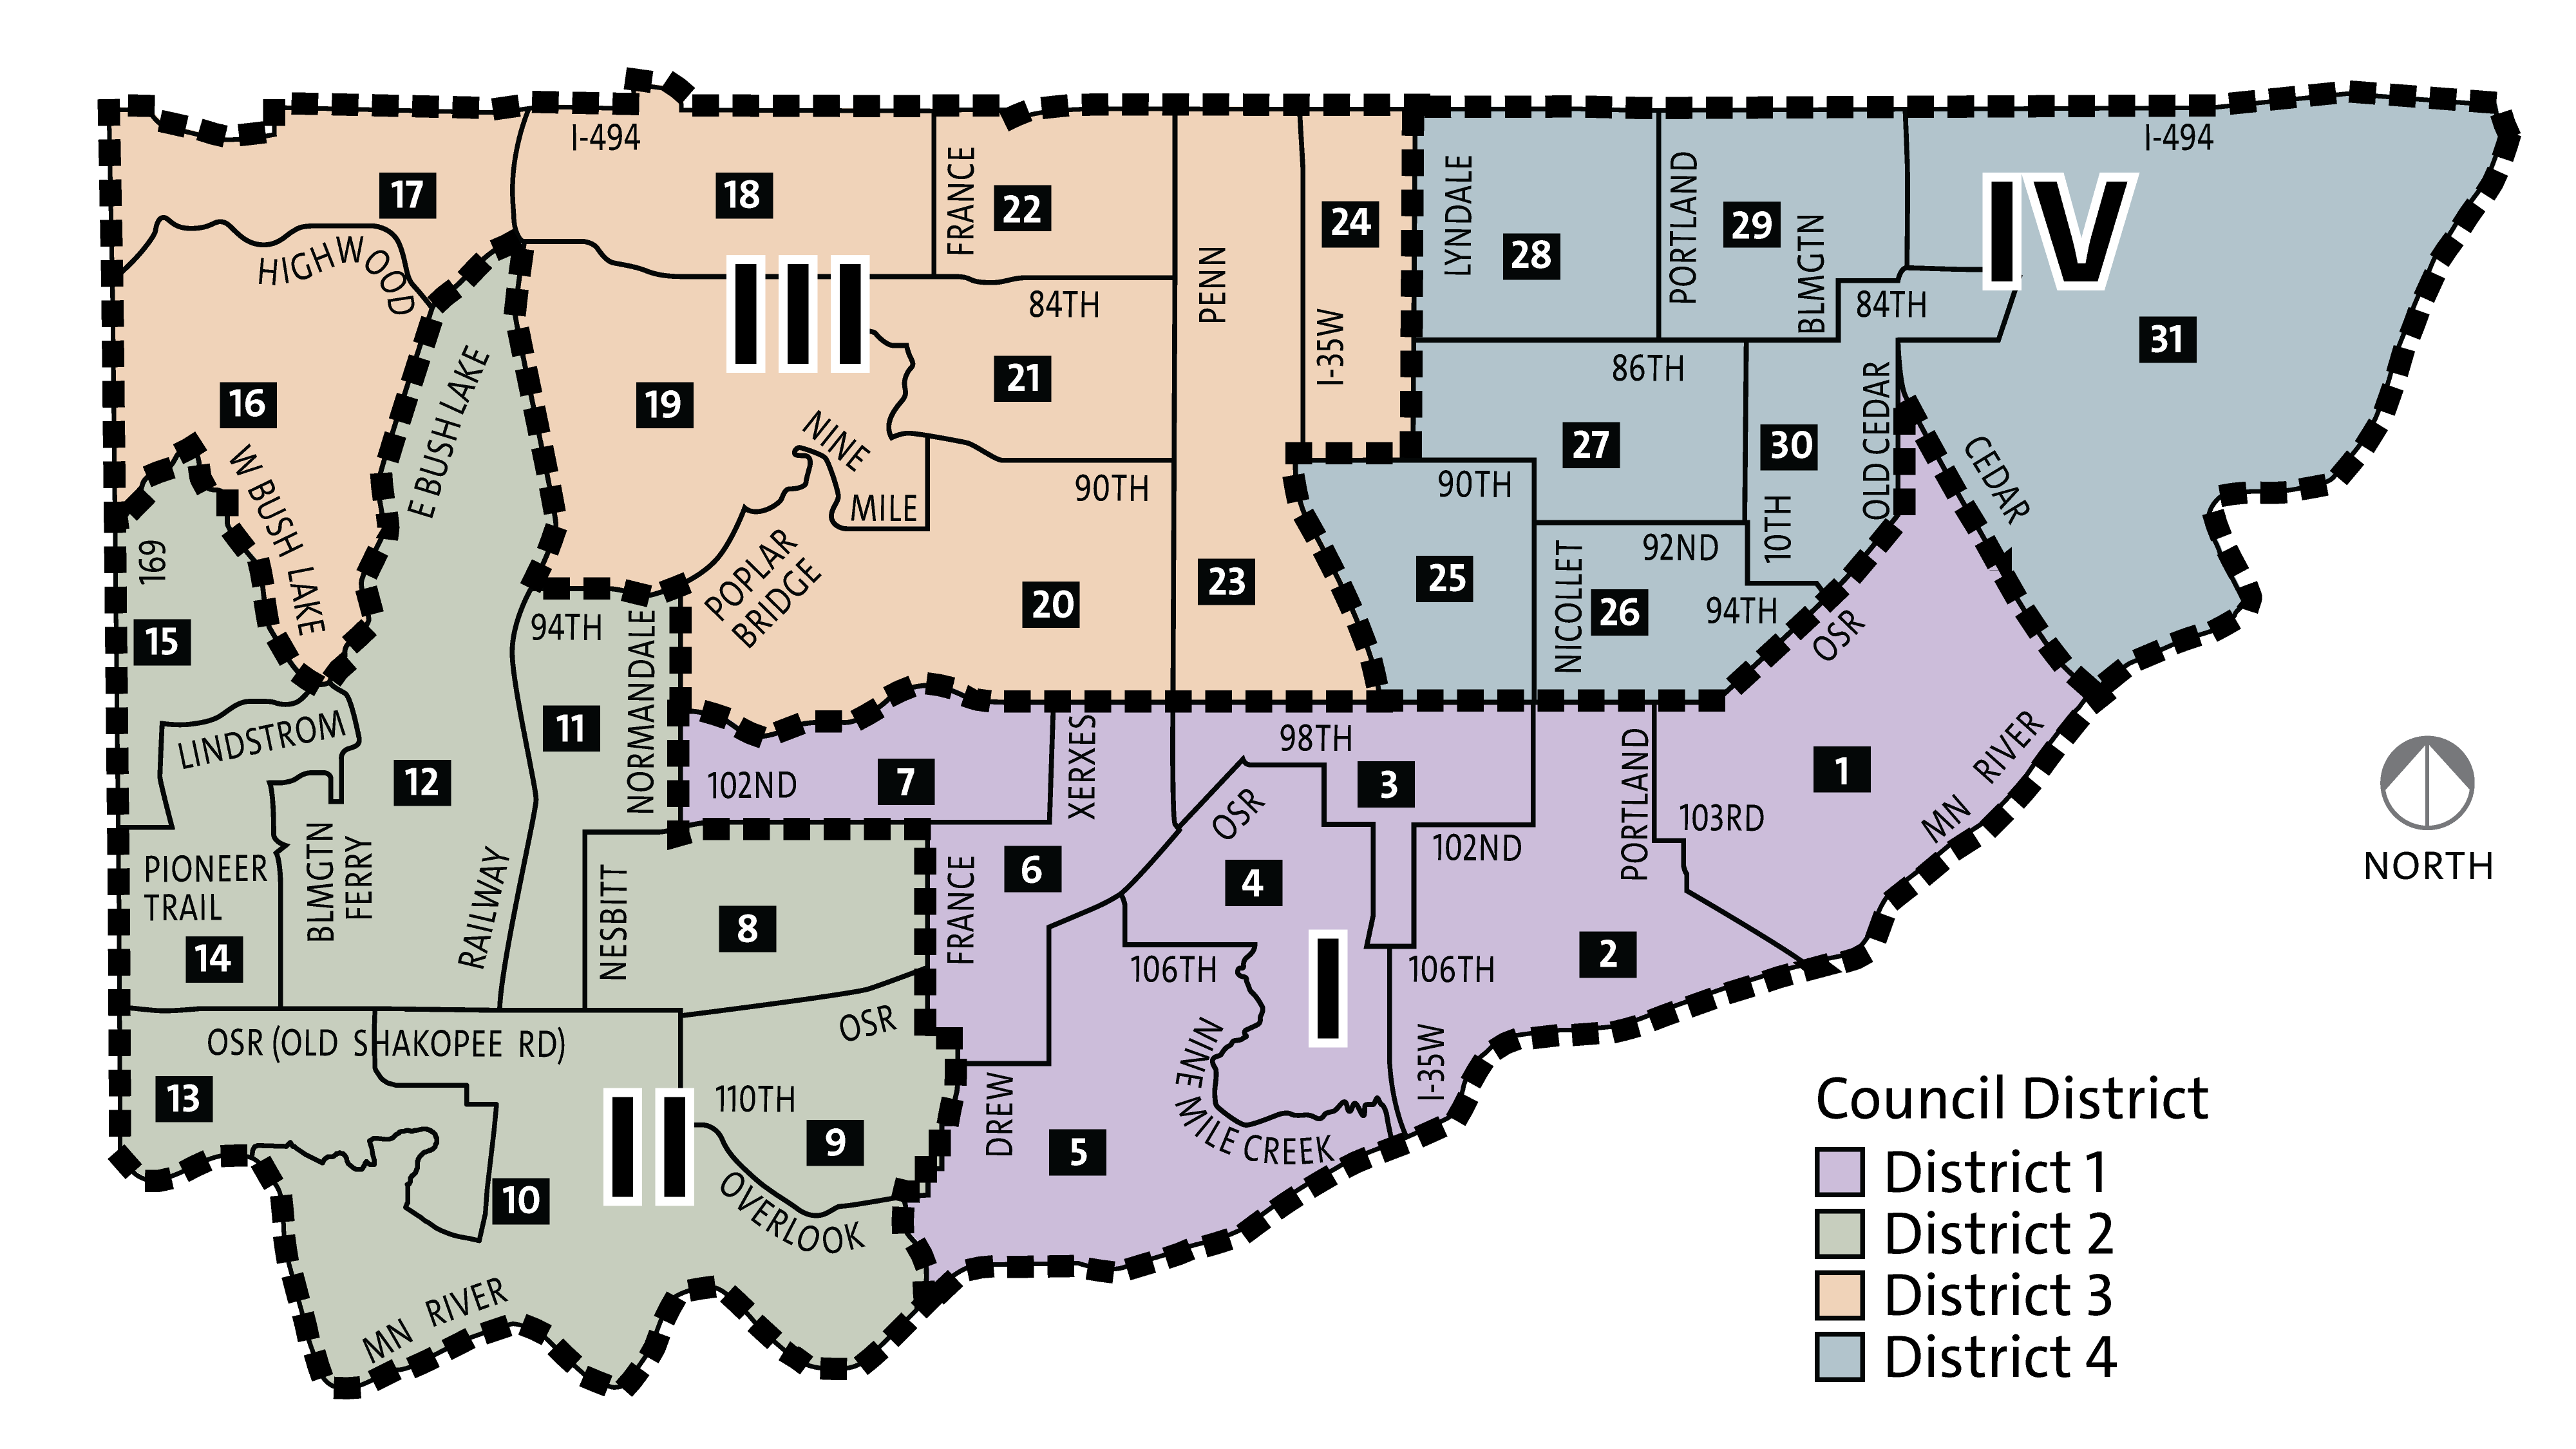 City Council districts